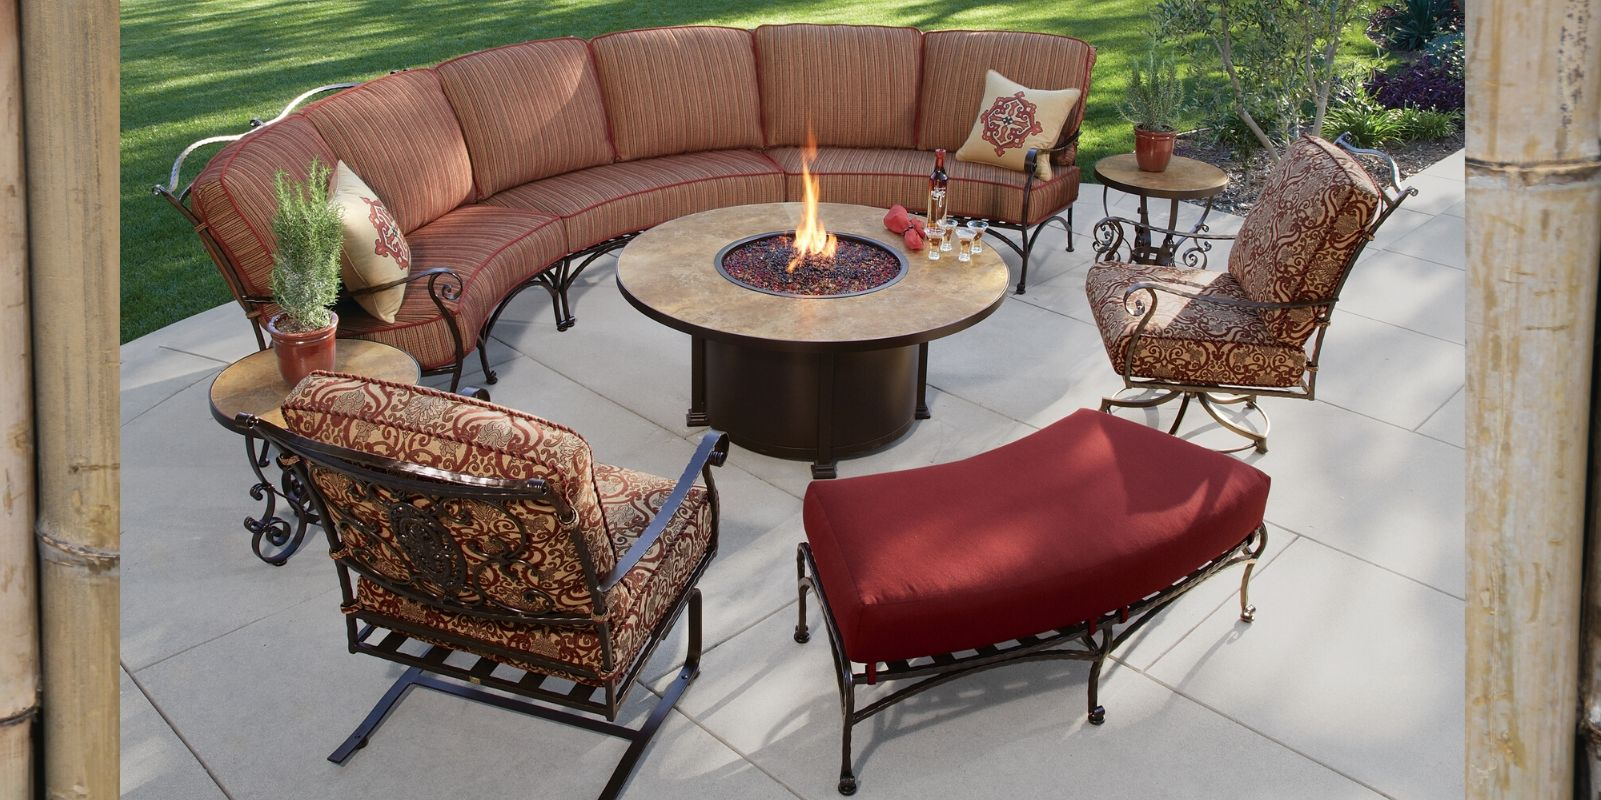 Patio Furniture Outdoor Wicker All Weather The Patio intended for dimensions 1601 X 800